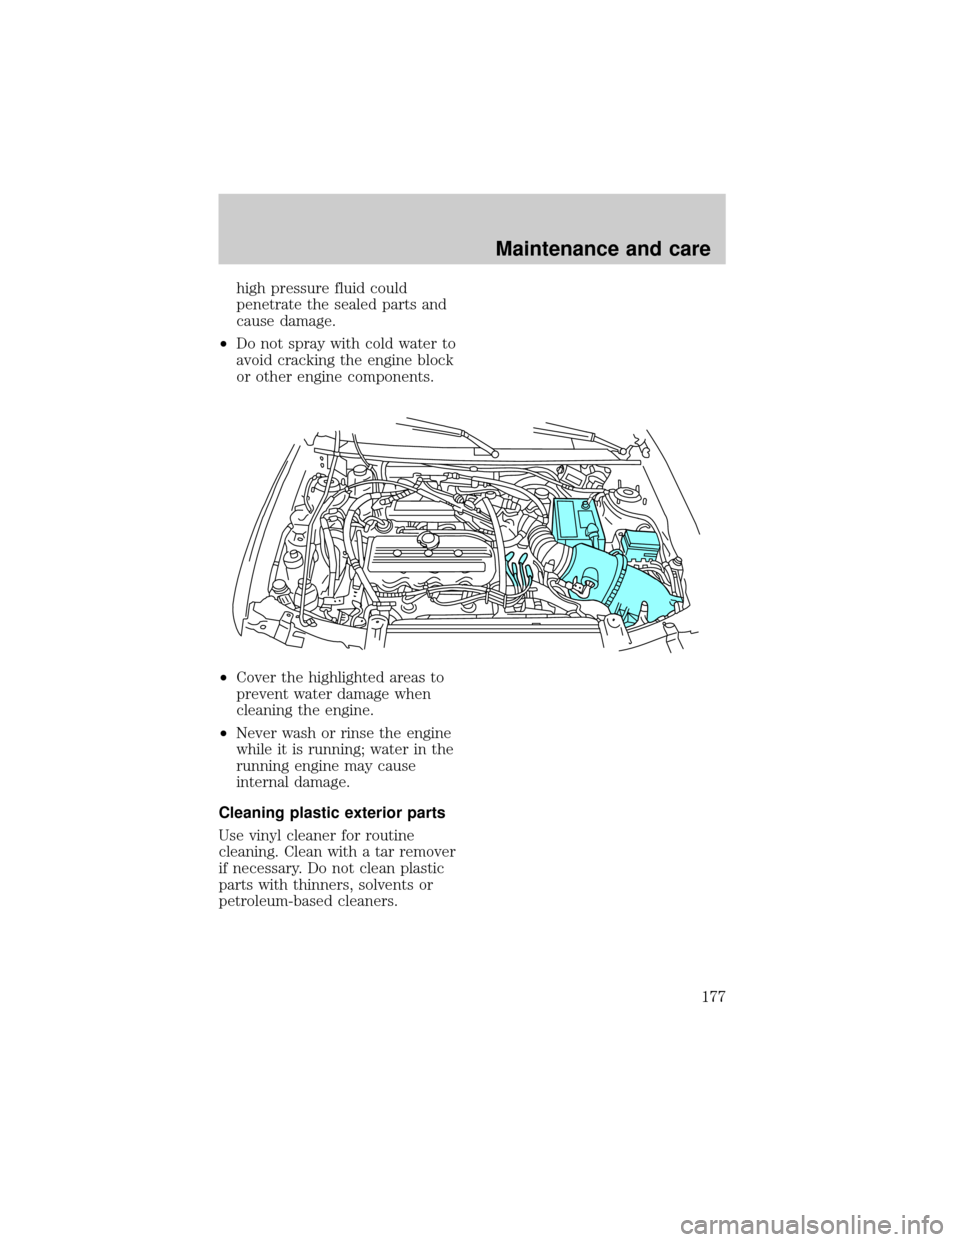 FORD ESCORT 1998 7.G Owners Manual high pressure fluid could
penetrate the sealed parts and
cause damage.
²Do not spray with cold water to
avoid cracking the engine block
or other engine components.
²Cover the highlighted areas to
pr